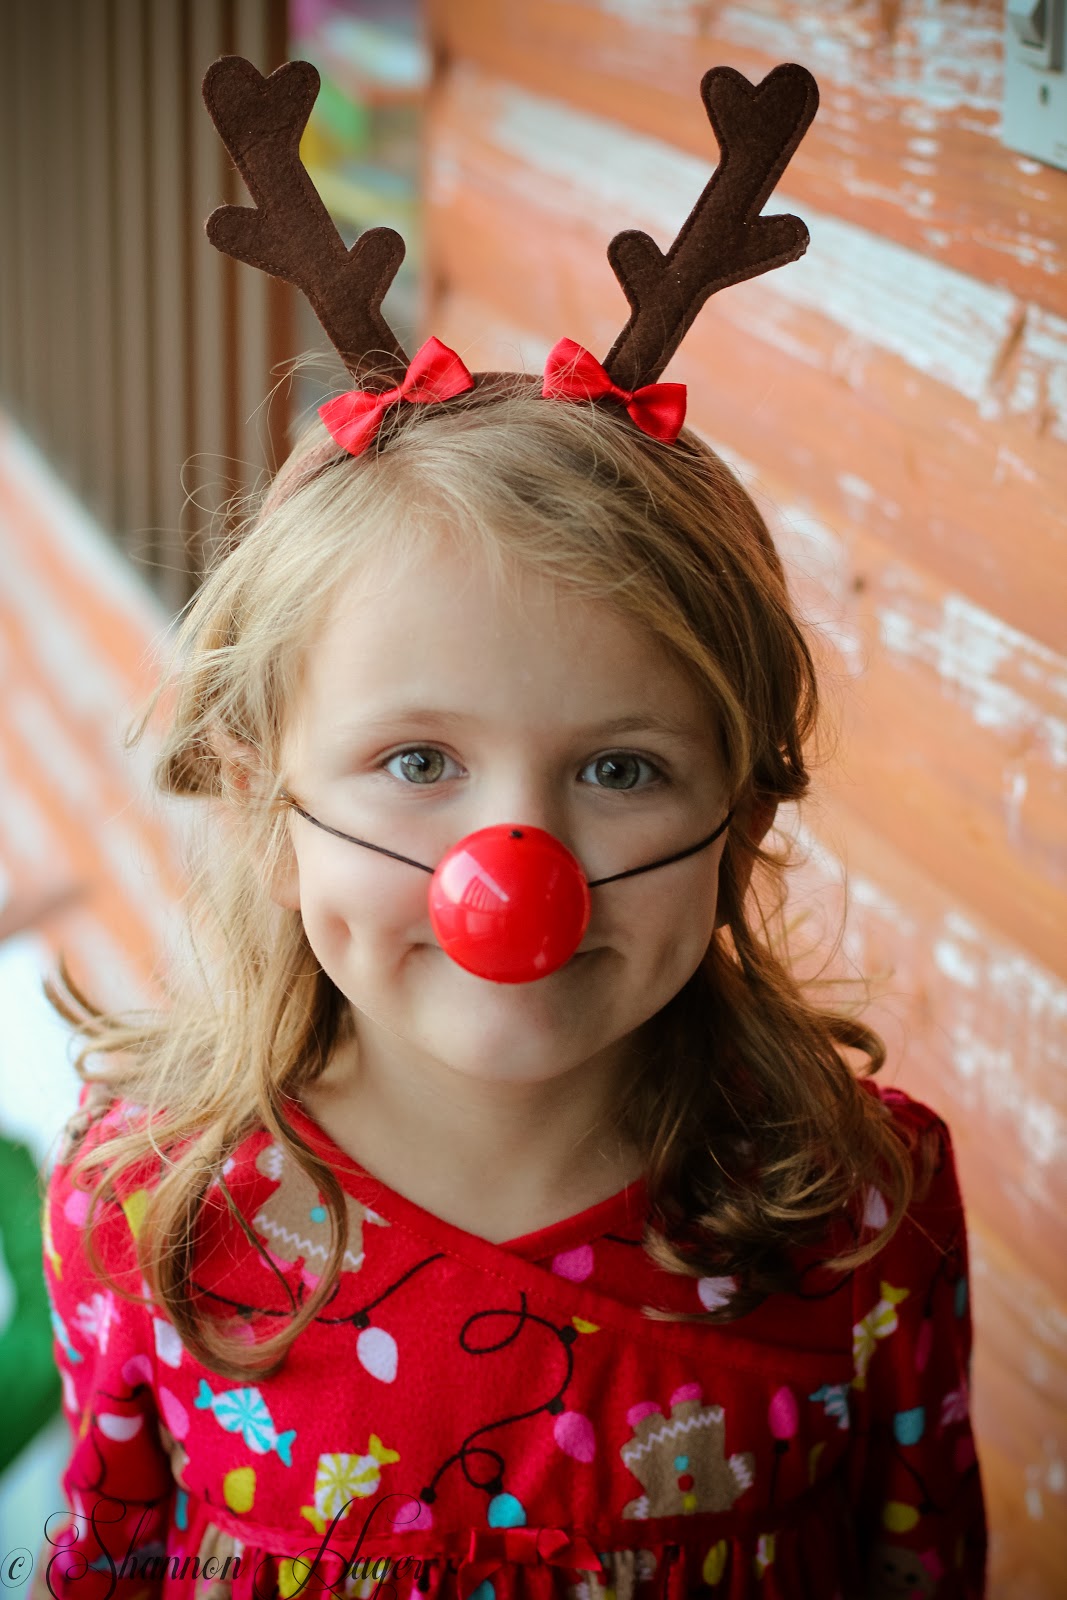 Enjoying Life With 4 Kids: Rudolph the Red Nosed Reindeers